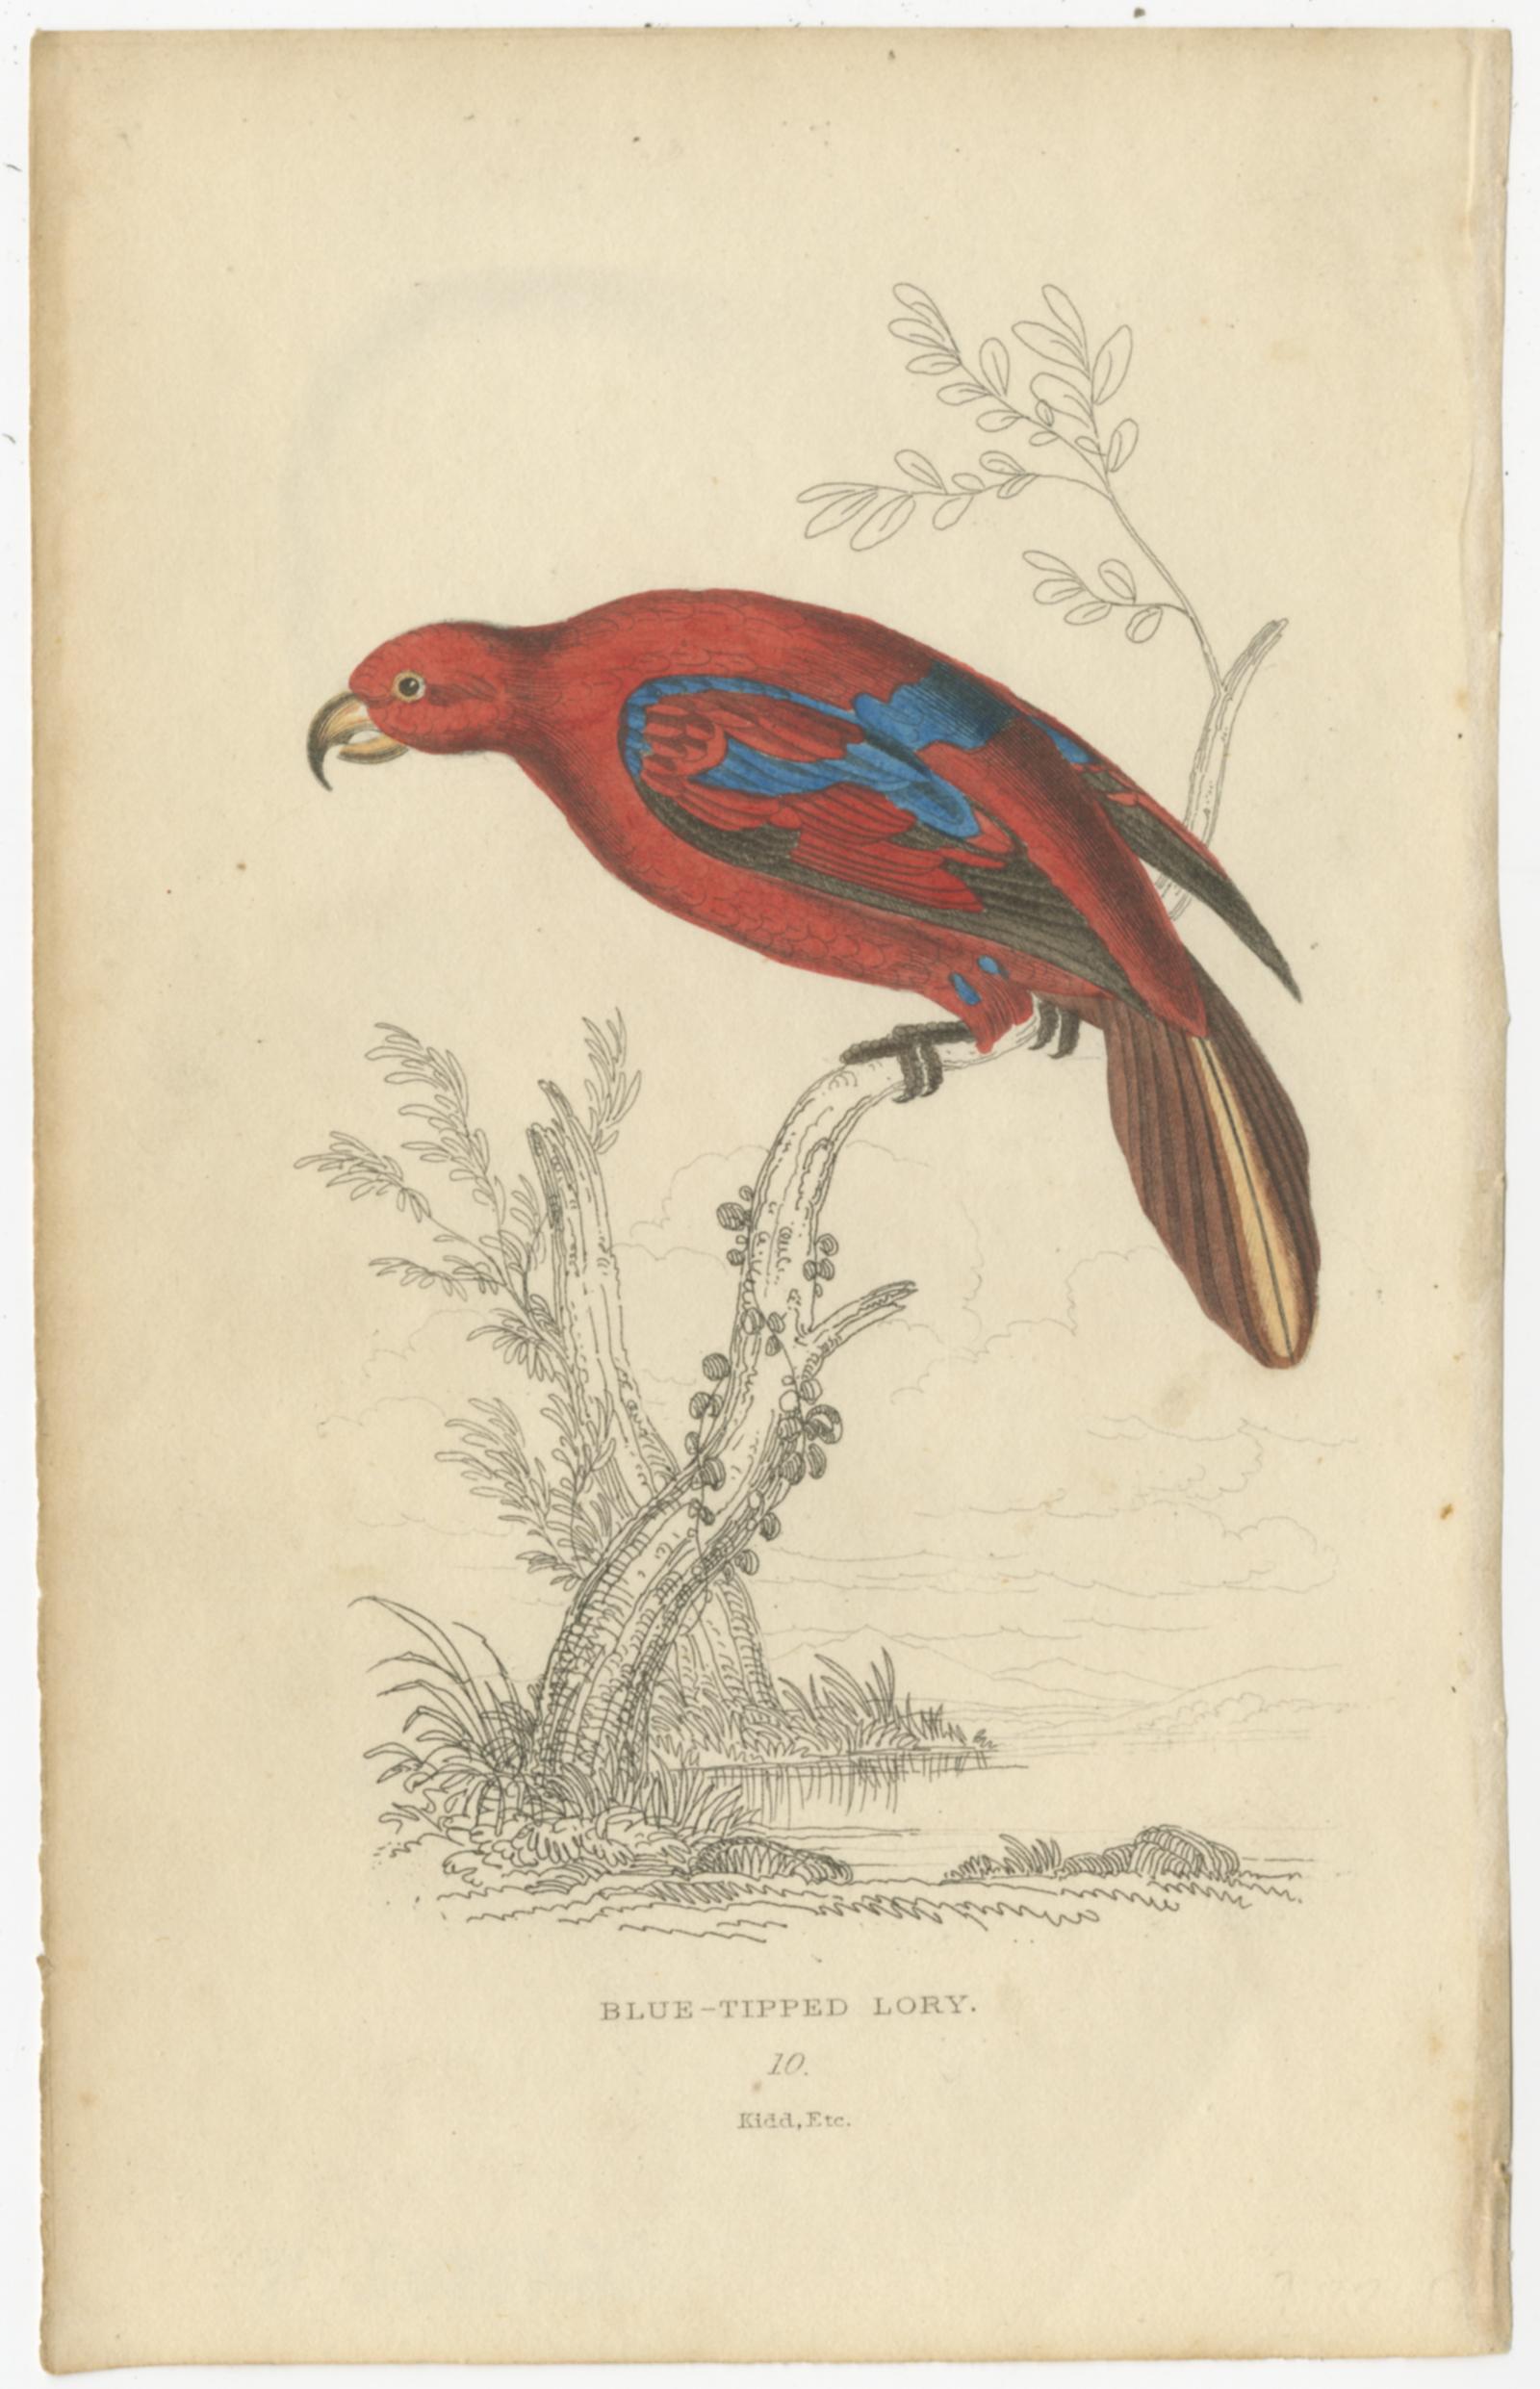 Set of four antique prints titled 'Blue-Tipped Lory - Deep-Blue Maccaw - Battledore-Tailed Parrot - Splendid Parrot'. These prints originate from 'The Miscellany of Natural History' by Thomas Dick Lauder & Captain Thomas Brown. Engraved by Joseph B.